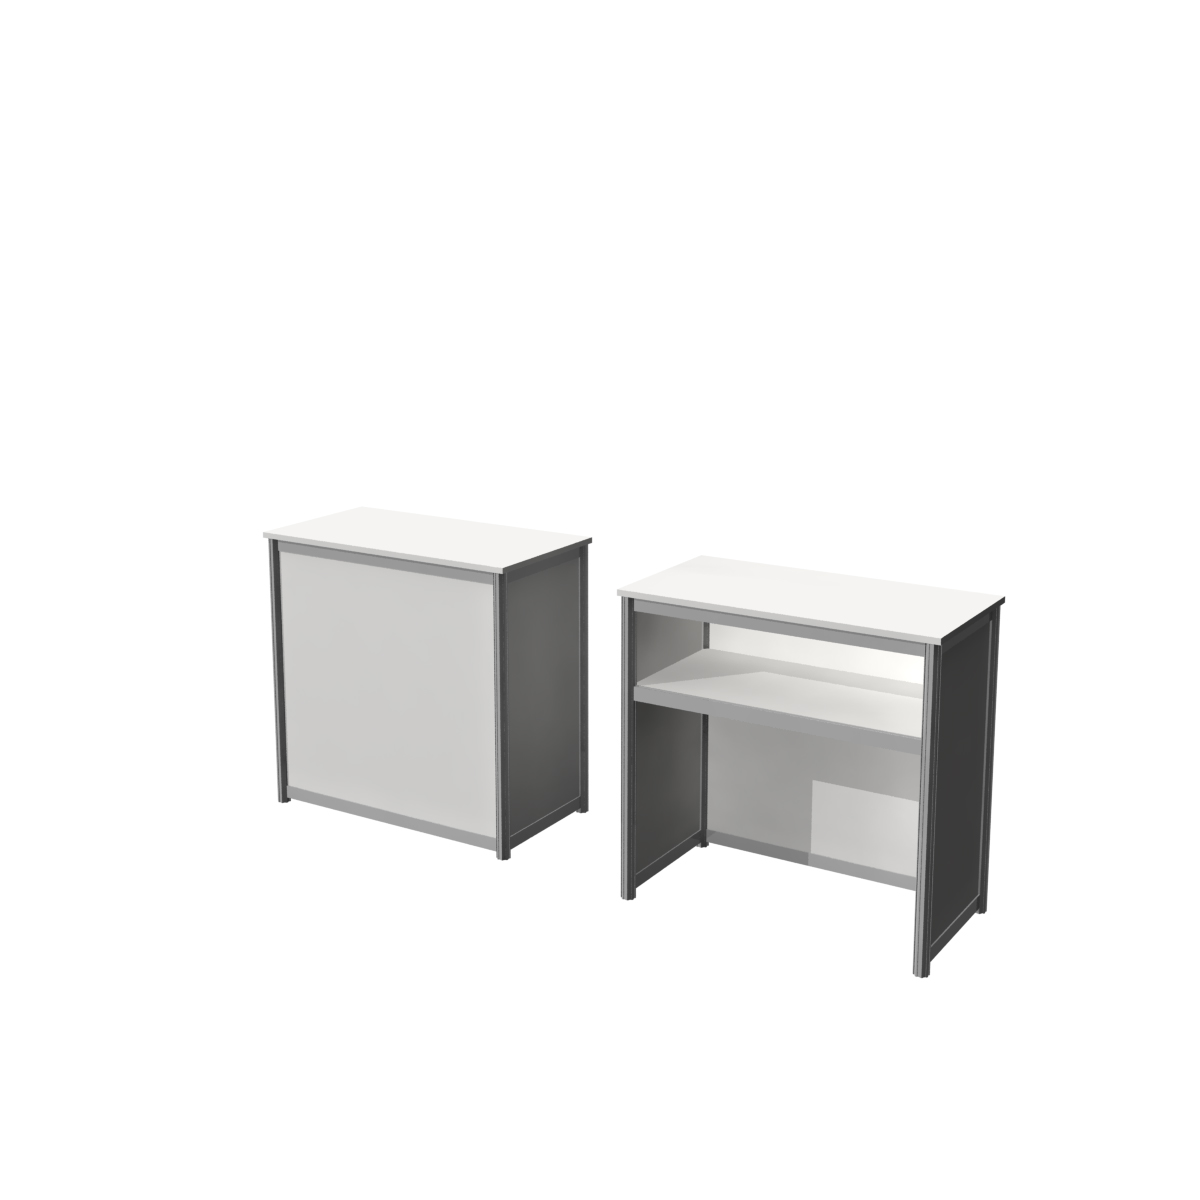 Aluminum frame counter with melamine infill and overhanging countertop - White